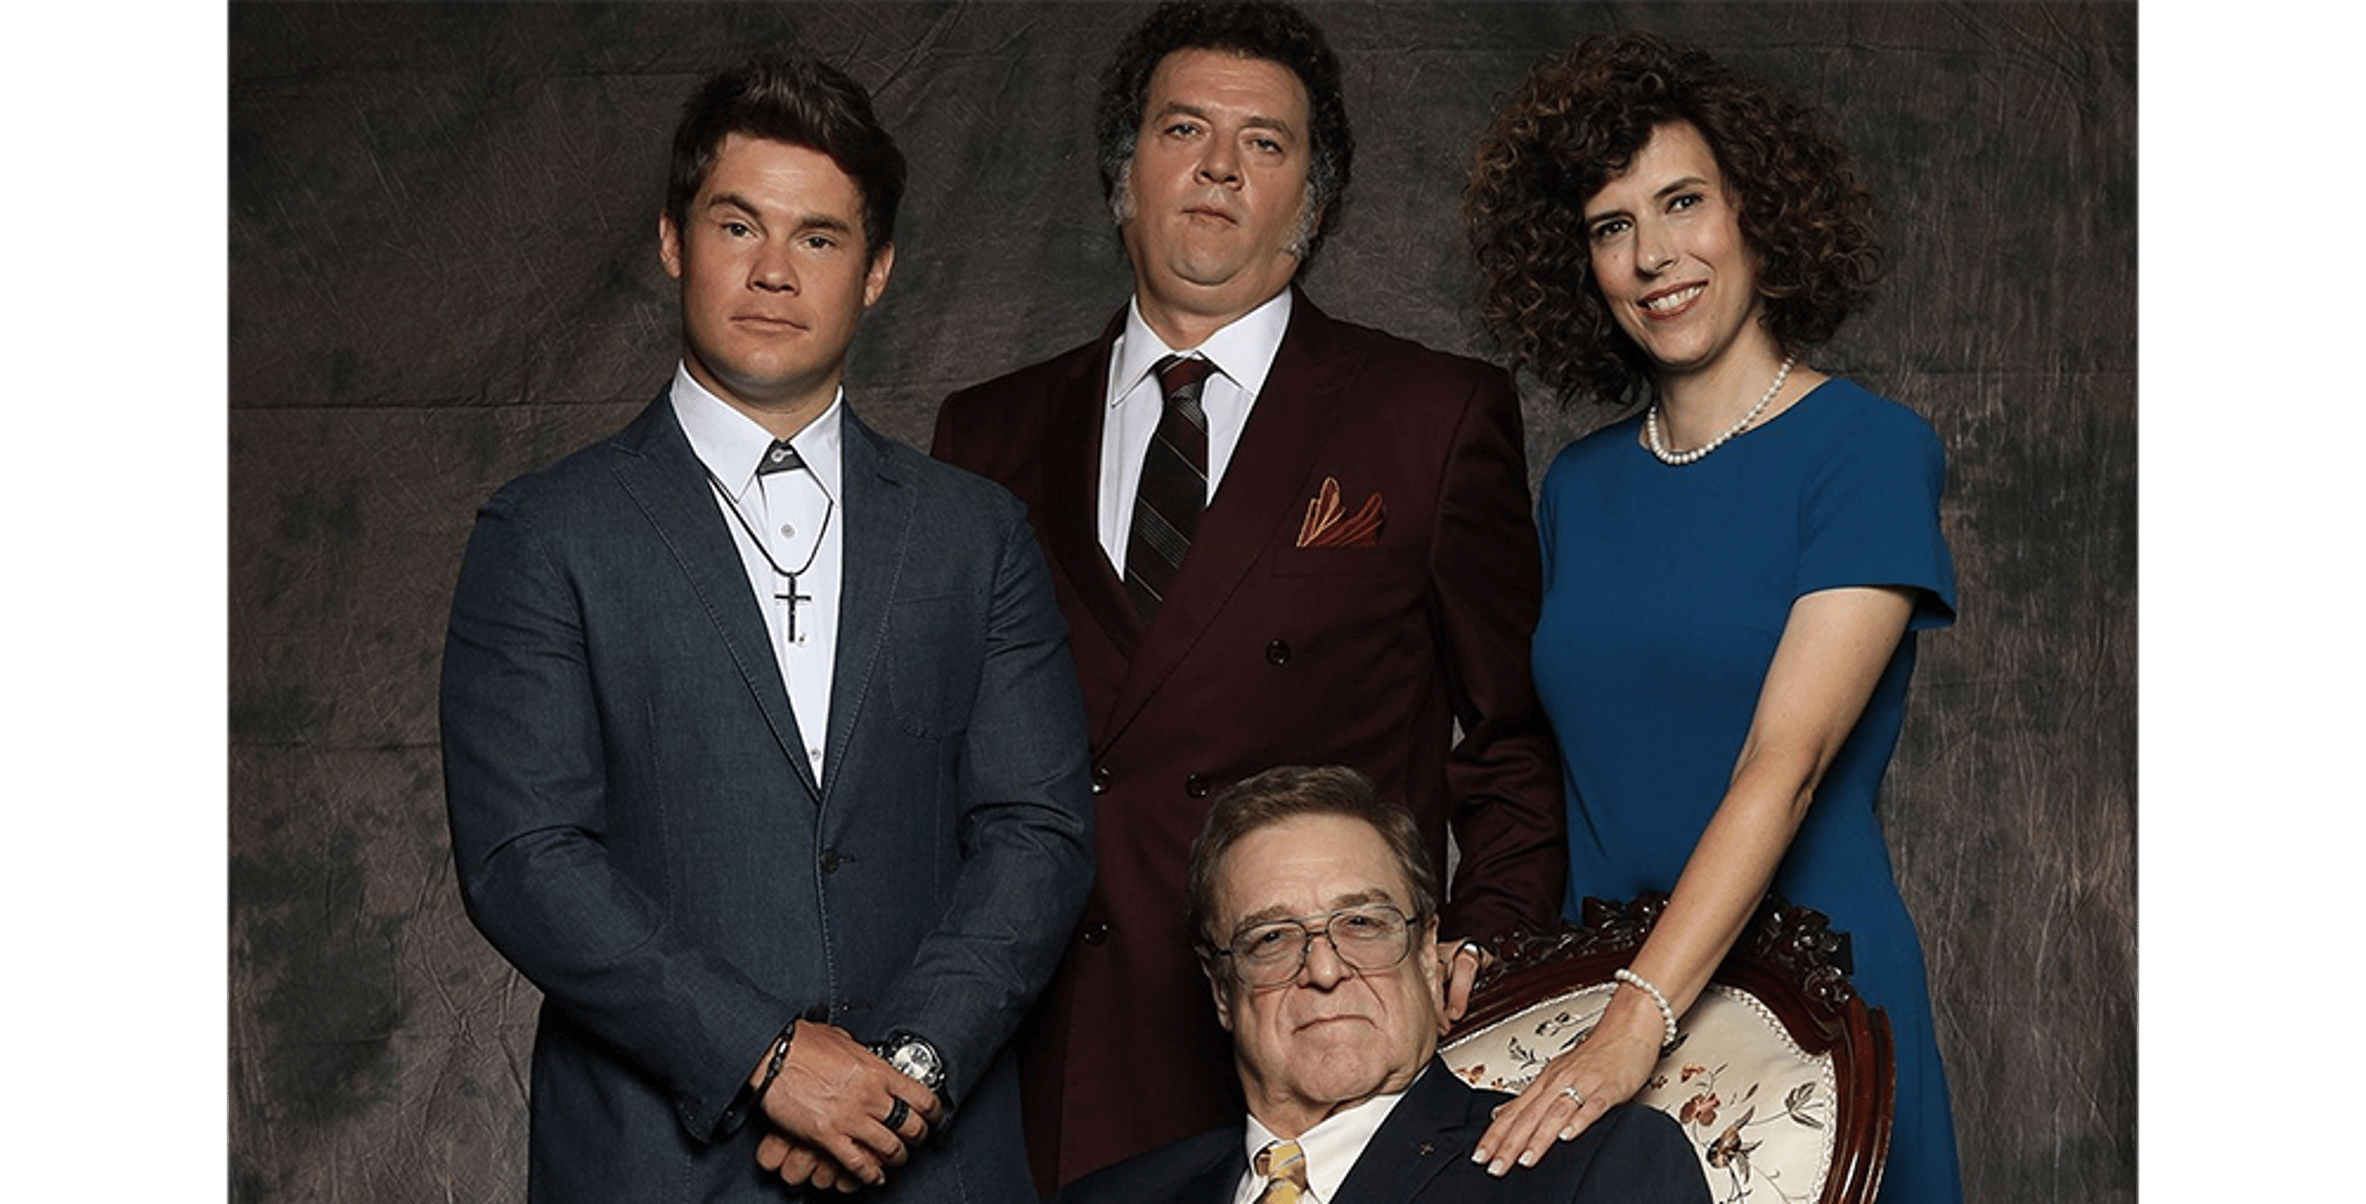 HBO's New  Series “The Righteous Gemstones” Casting